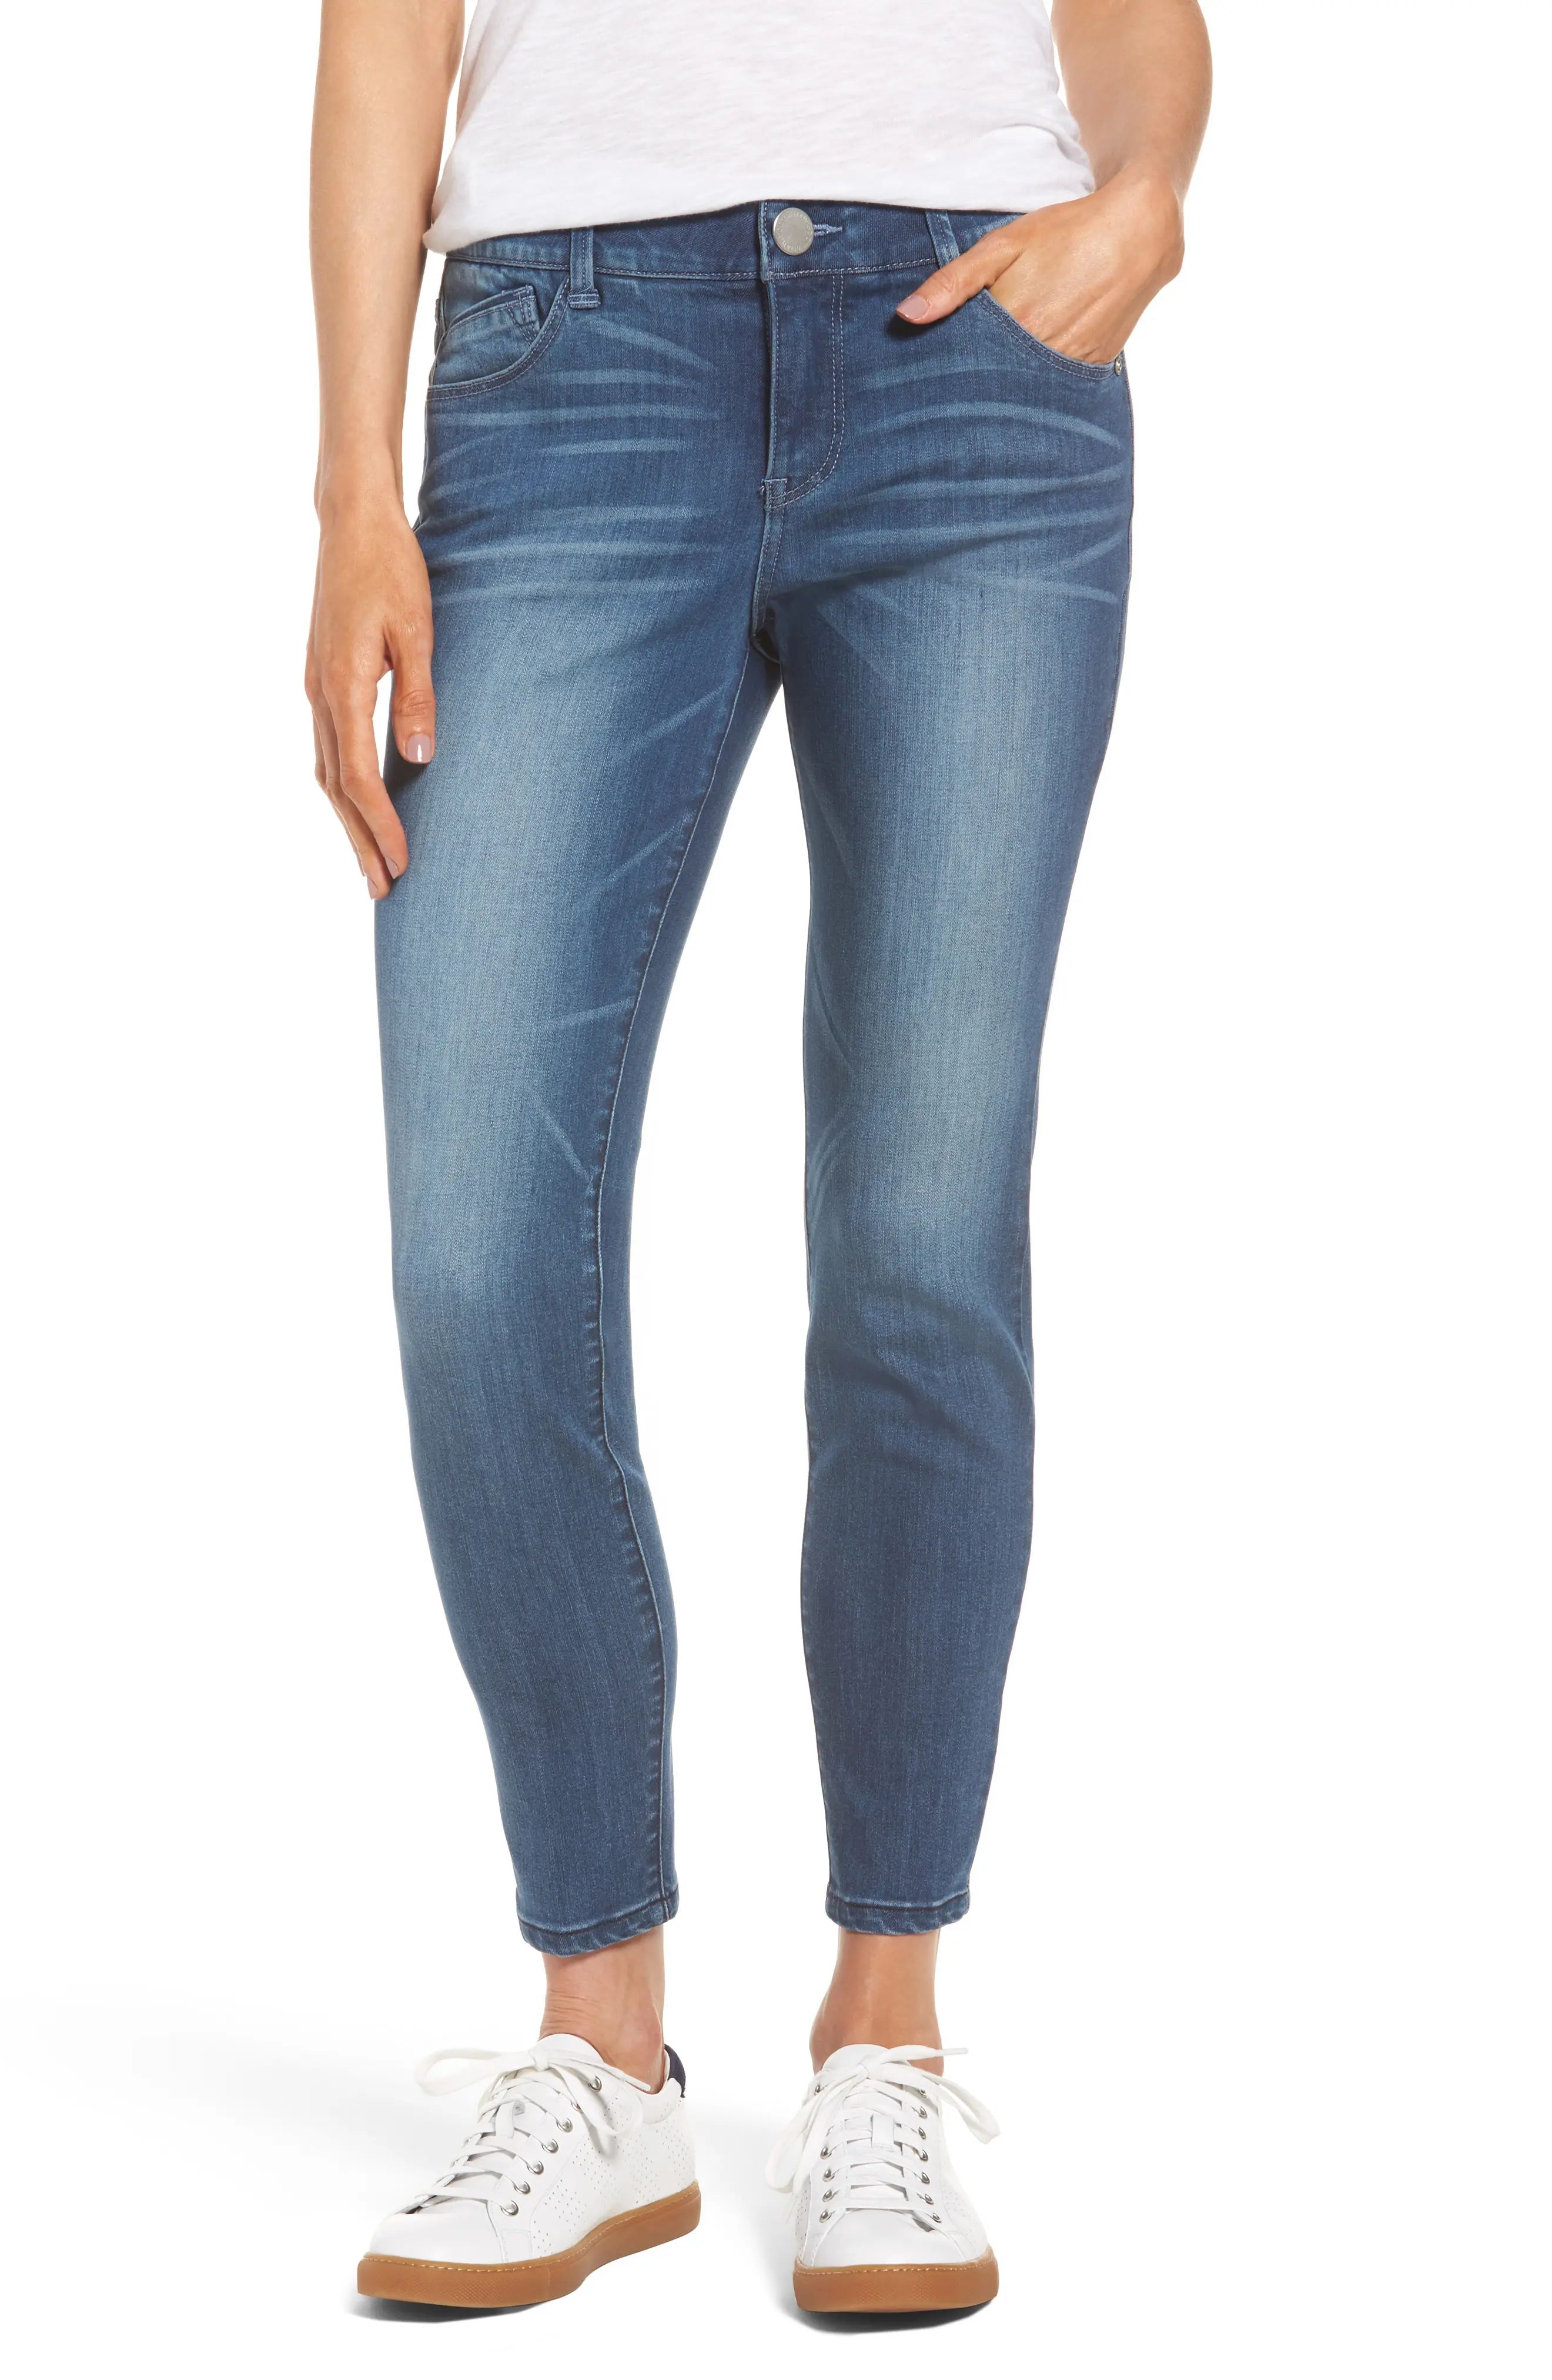 Ab-solution Stretch Ankle Skinny Jeans | Nordstrom